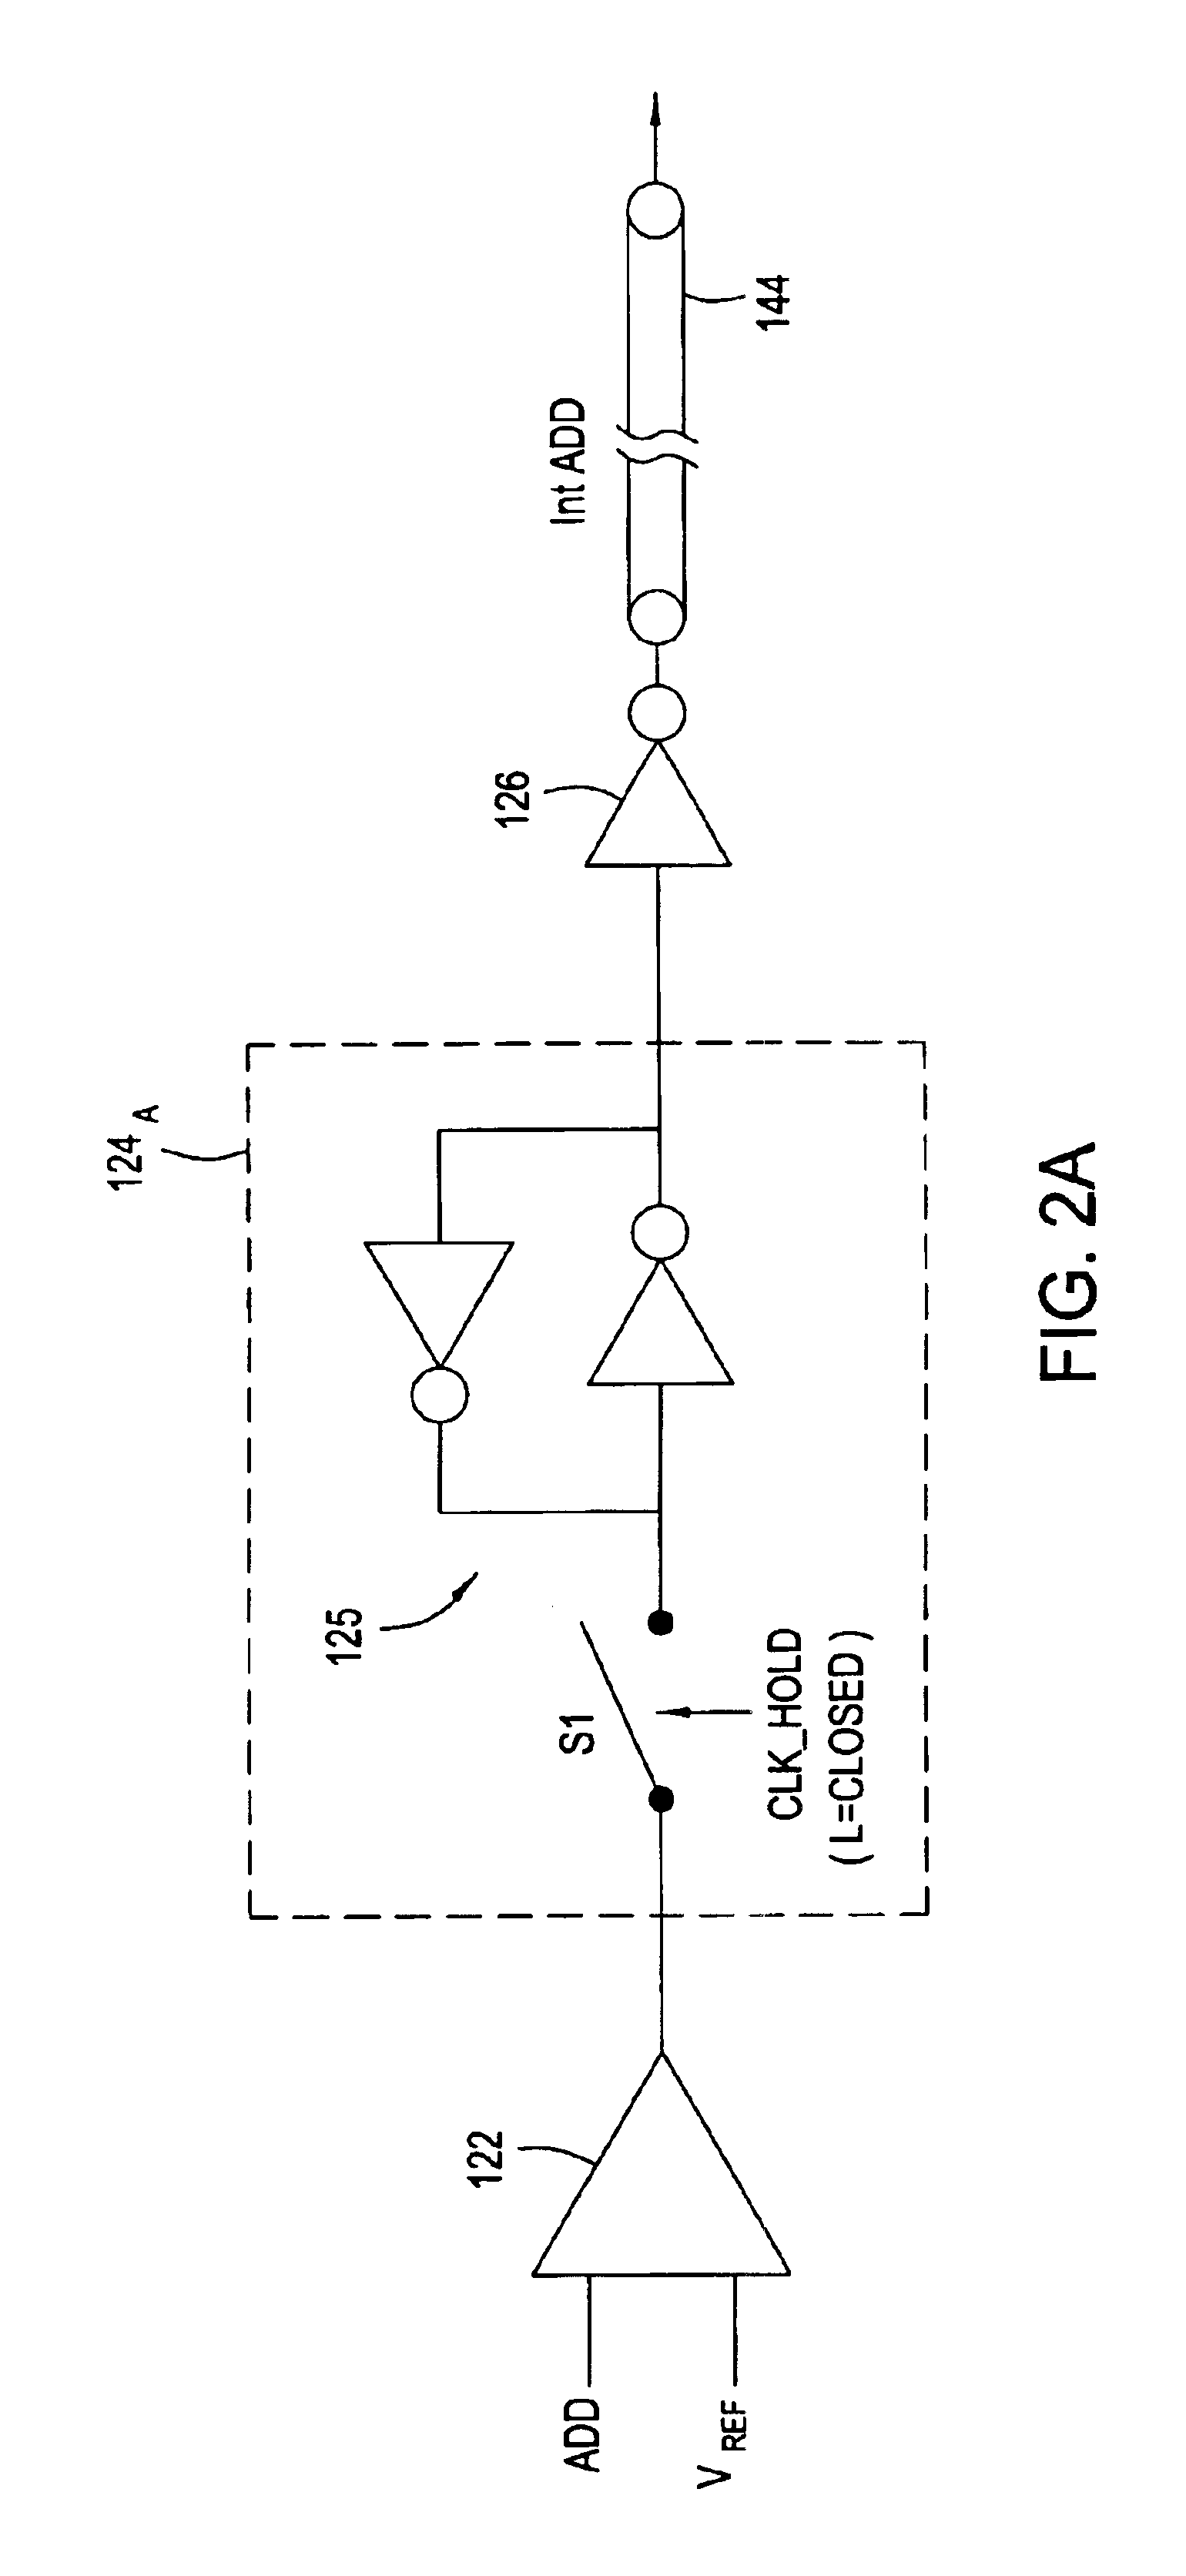 Latch scheme with invalid command detector